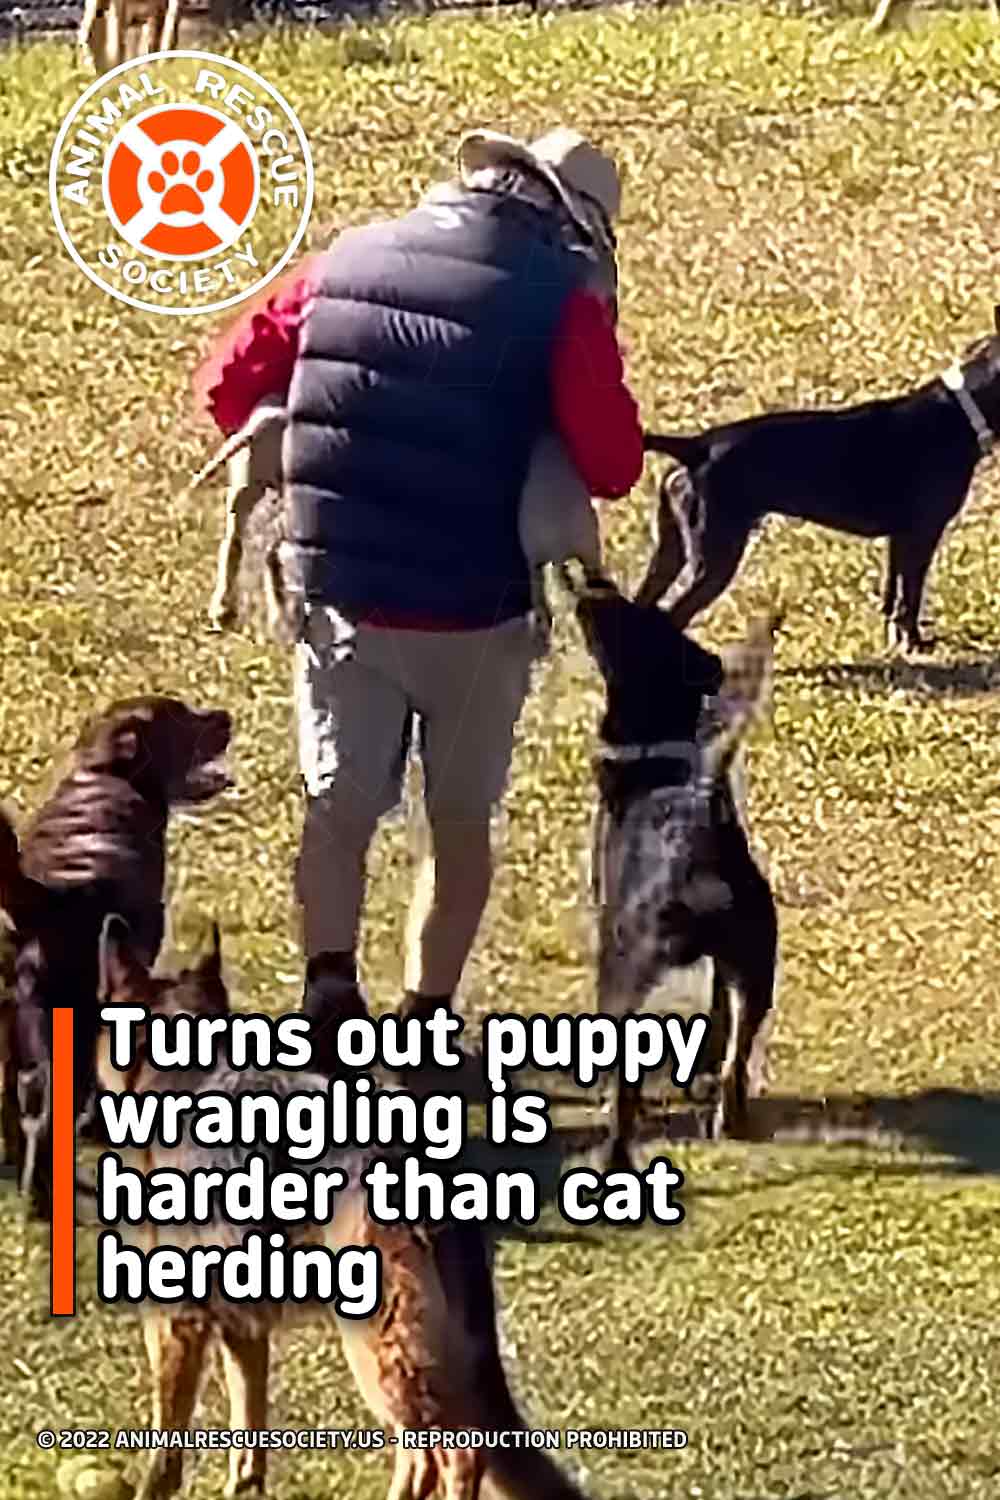 Turns out puppy wrangling is harder than cat herding